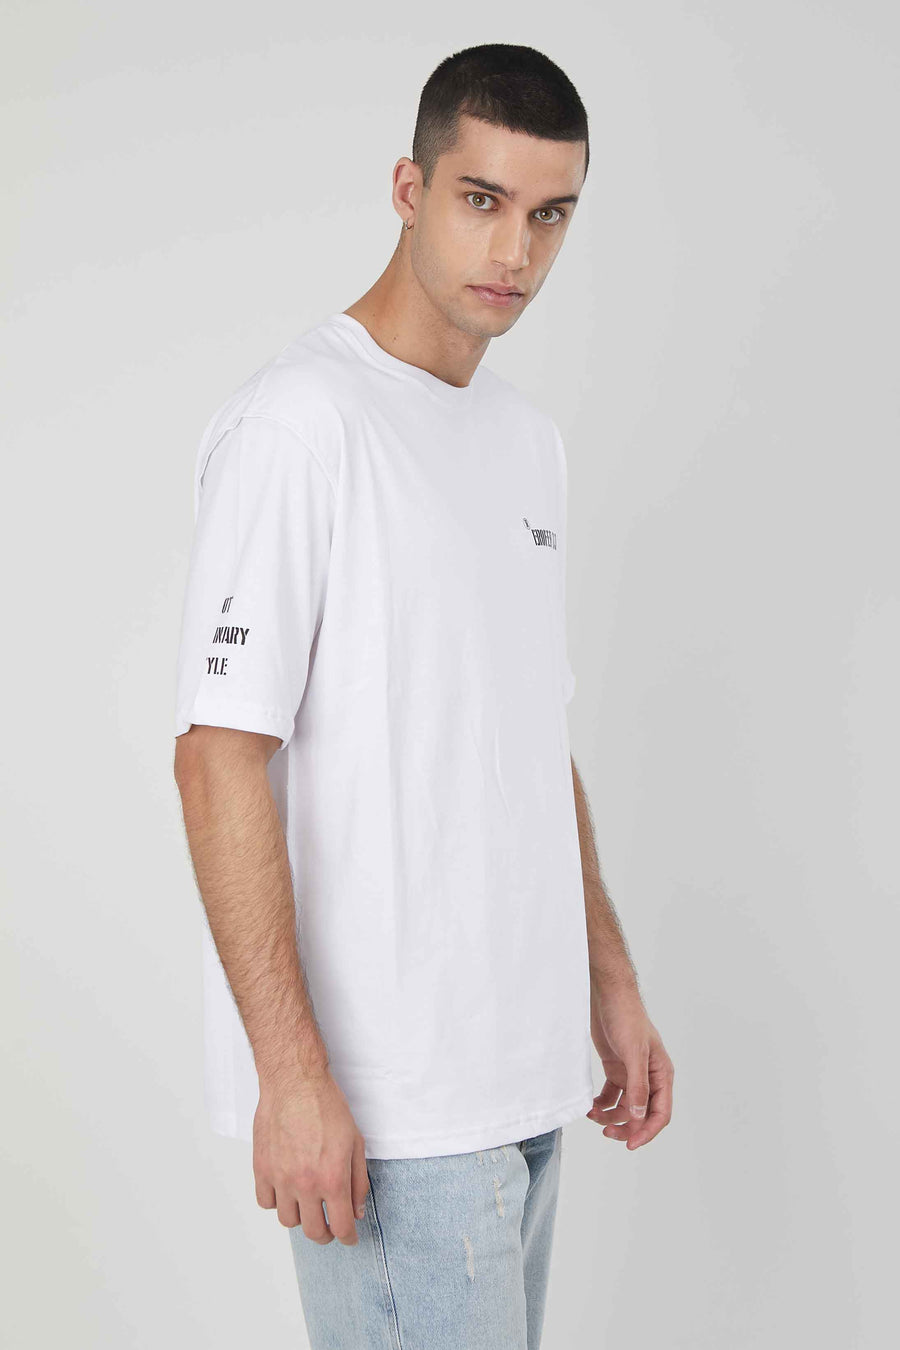 STAMMING T-SHIRTS AT WHITE AGAINST